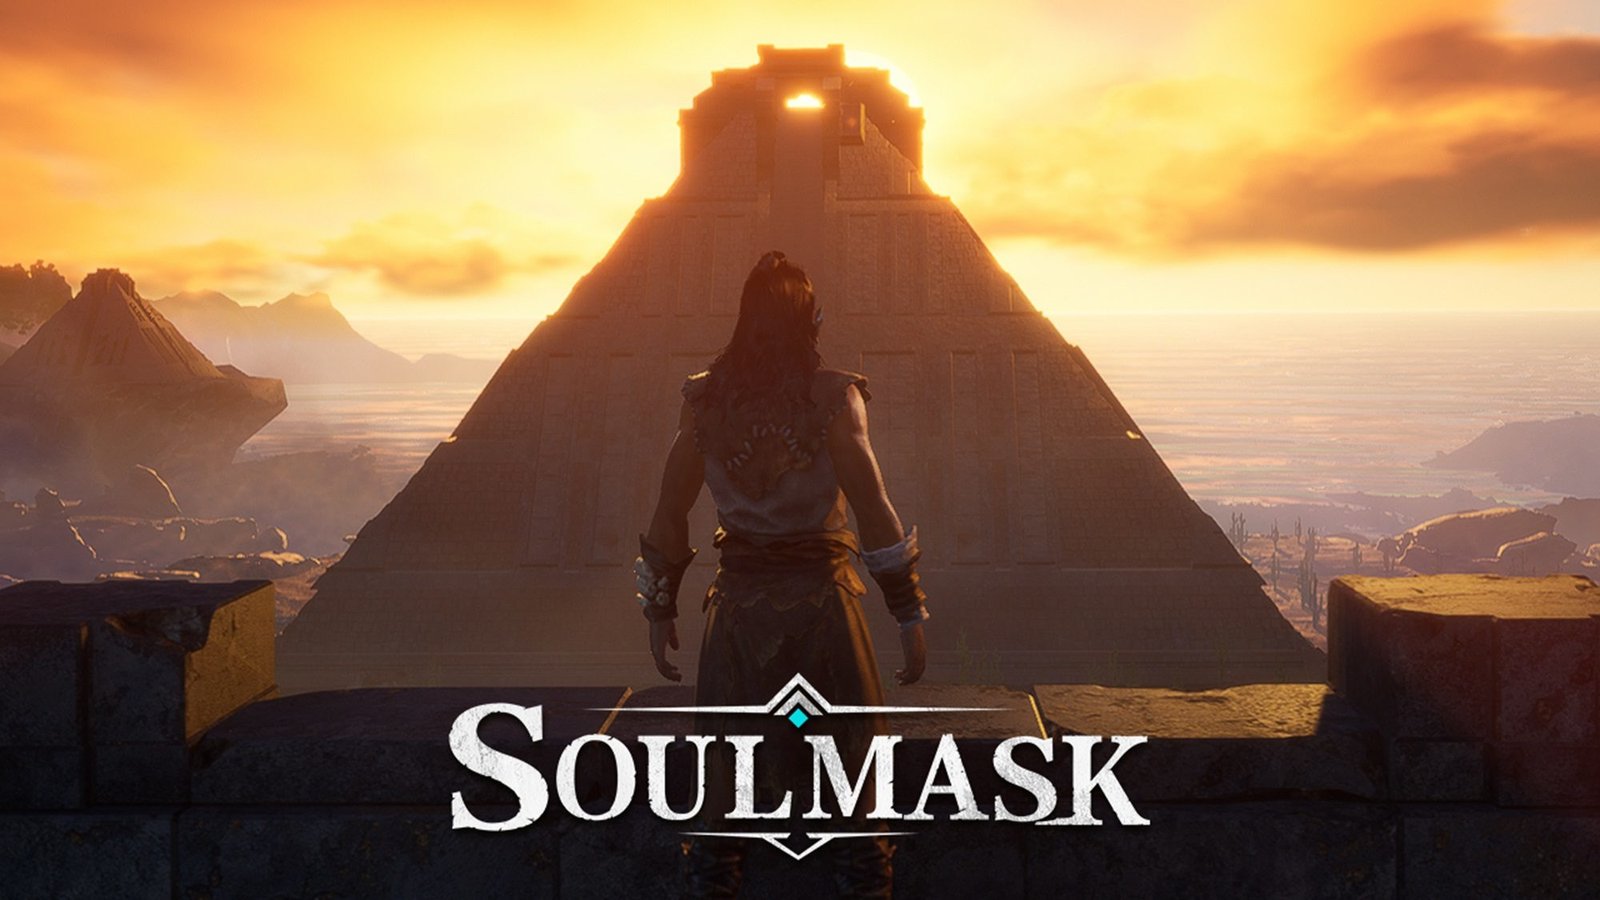 A new demo Soulmask of Survival Game